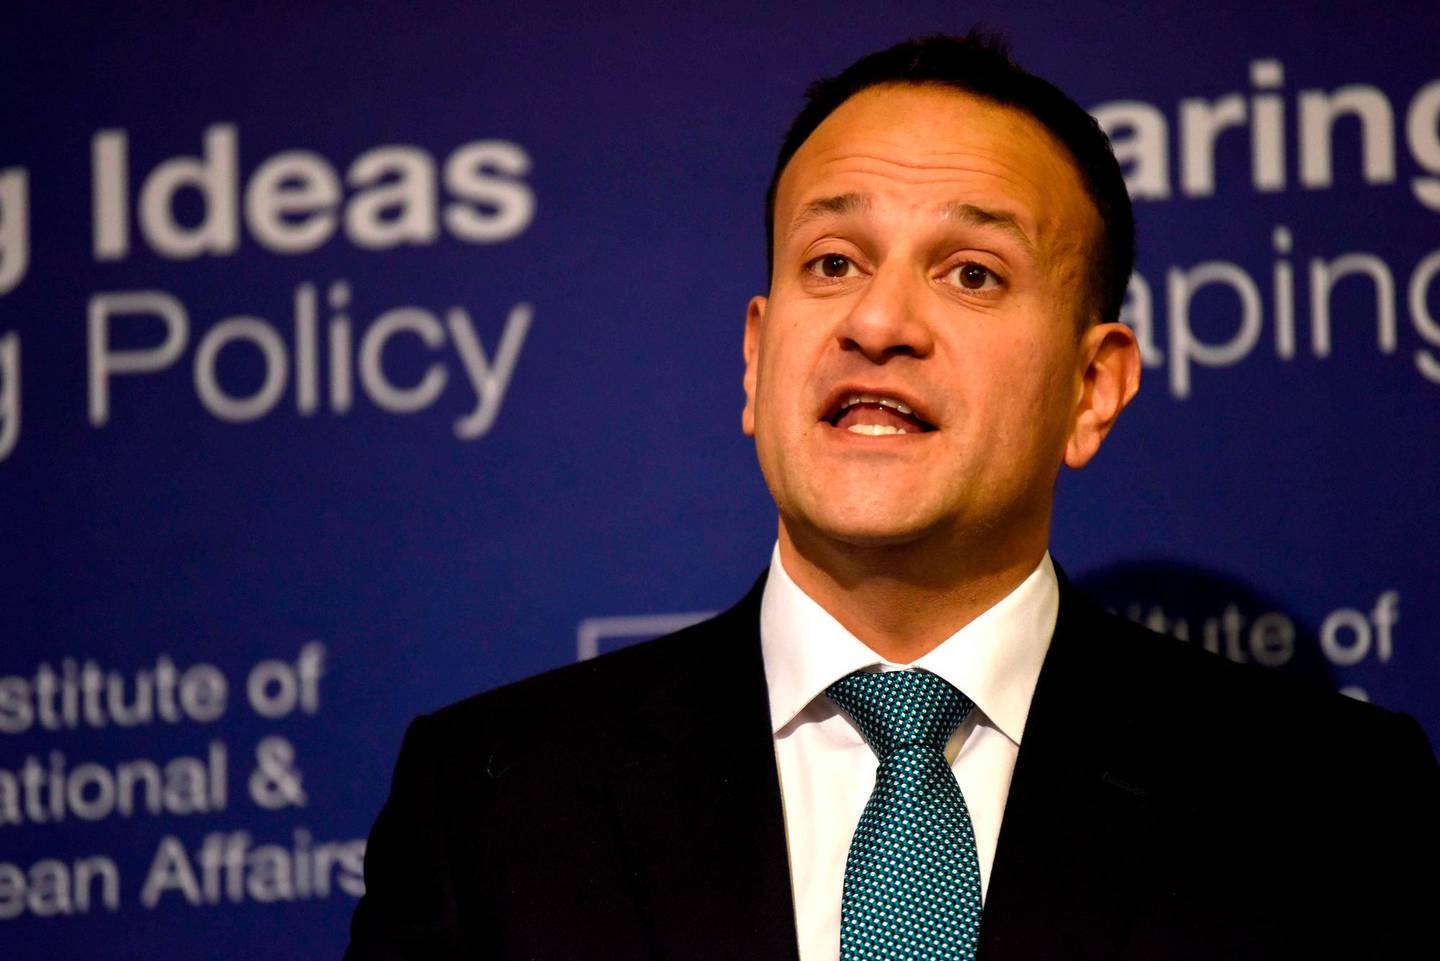 Ireland's Prime Minister Leo Varadkar addresses a gathering on the subject of Brexit at the Institute of International and European Affairs in Dublin, on January  31, 2020. - Britain on January 31 ends almost half a century of integration with its closest neighbours and leaves the European Union, starting a new -- but still uncertain -- chapter in its long history. (Photo by Bryan Meade / AFP)